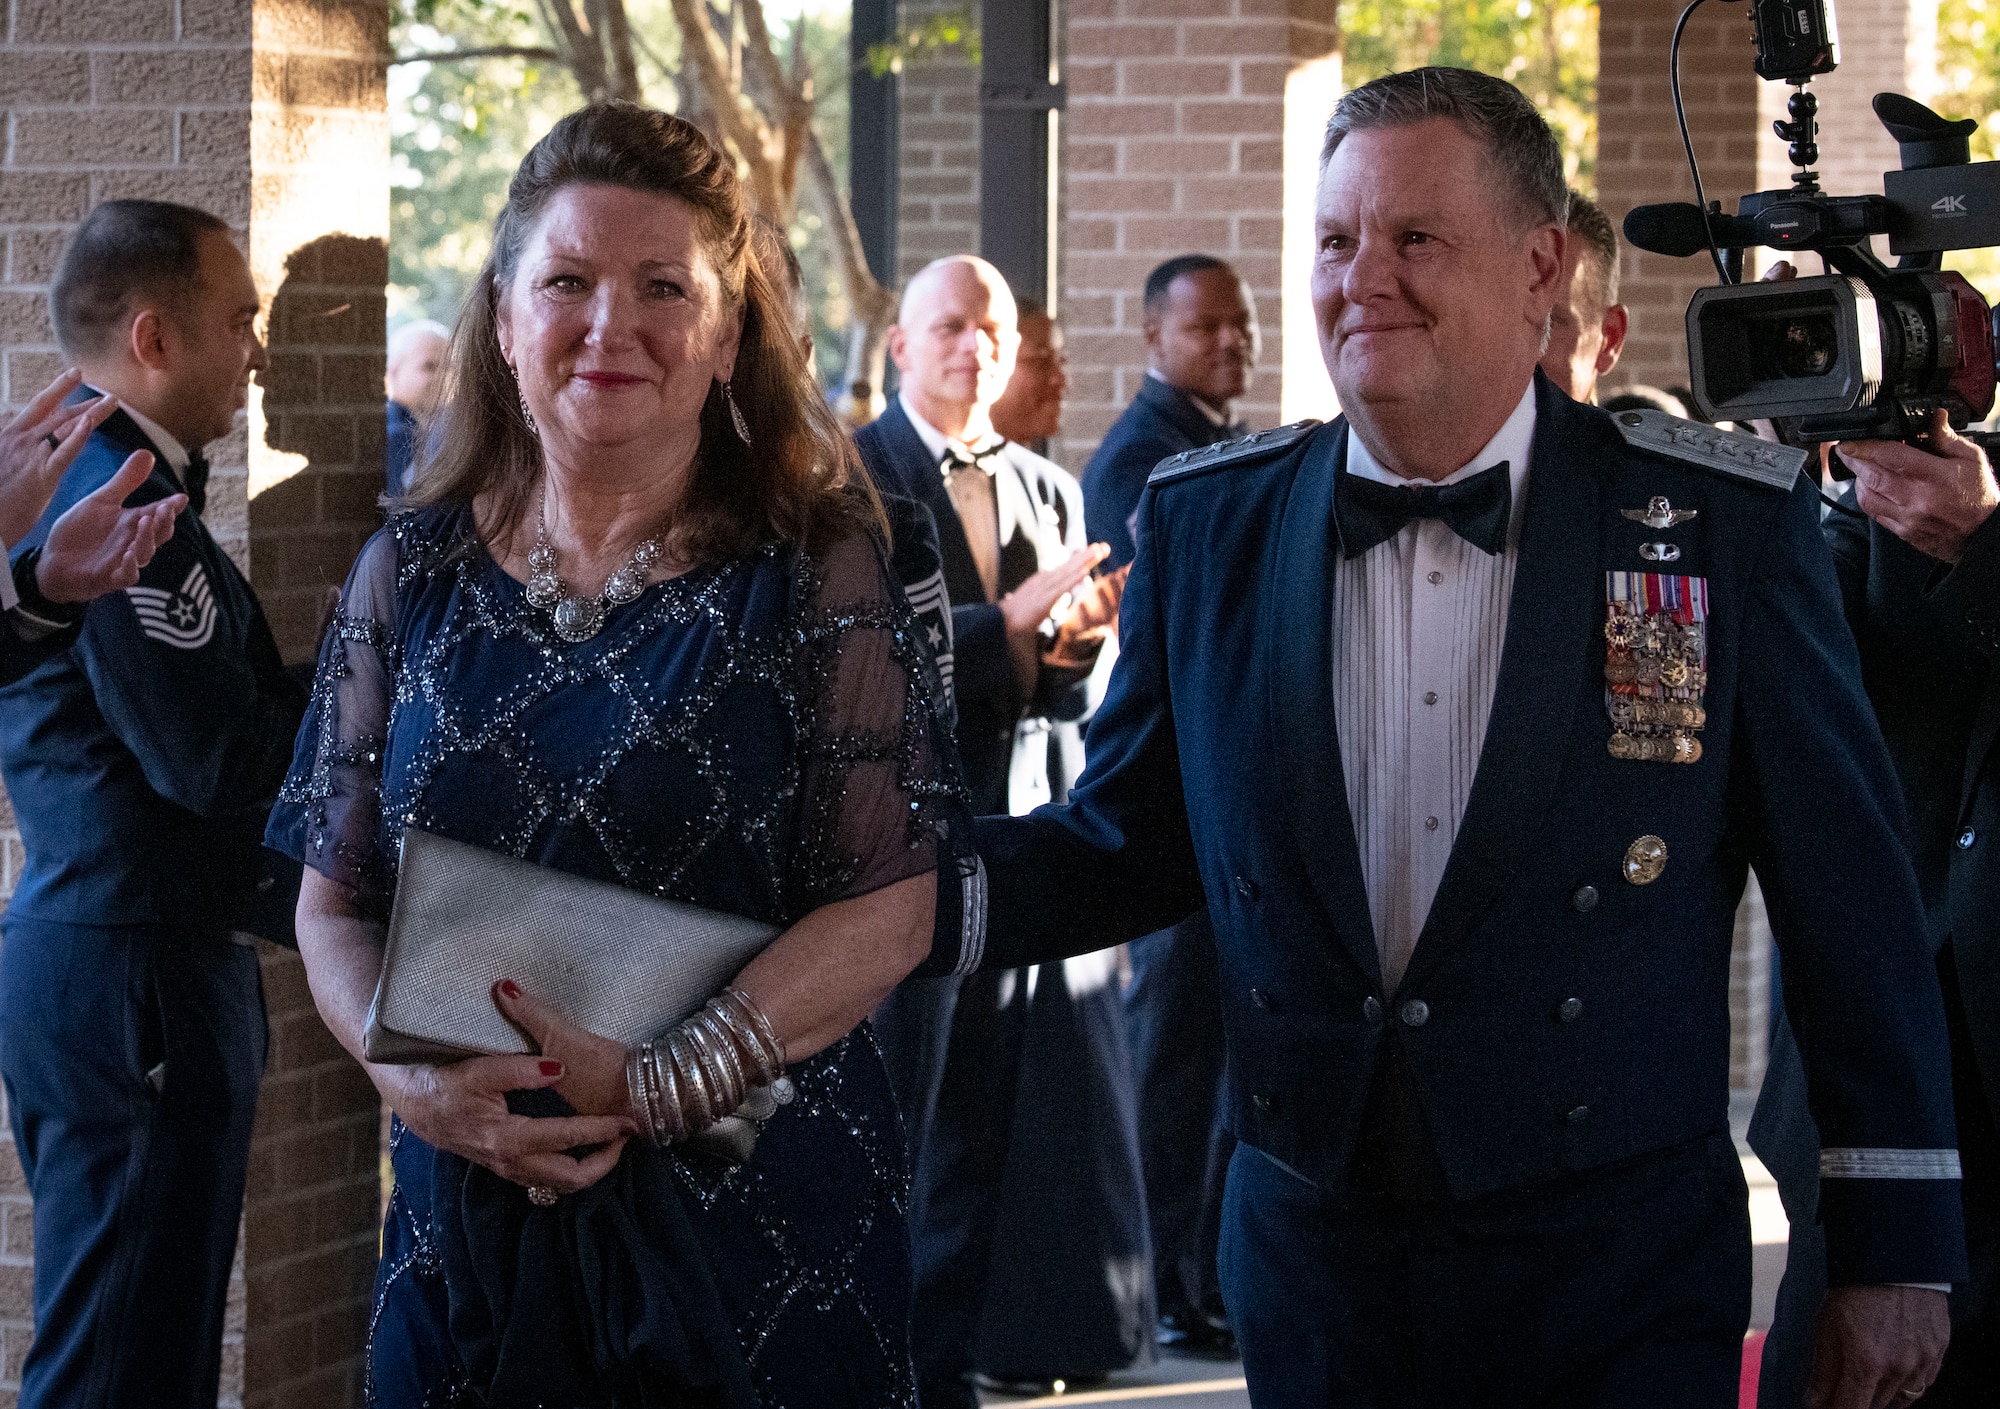 U.S. Air Force retired Lt. Gen. Marshall B. Webb, former Air Force Special Operations Command commander and Air Education and Training Command commander, and wife, Dawna, are greeted during an Order of the Sword ceremony at Keesler Air Force Base, Mississippi, Oct. 15, 2022.